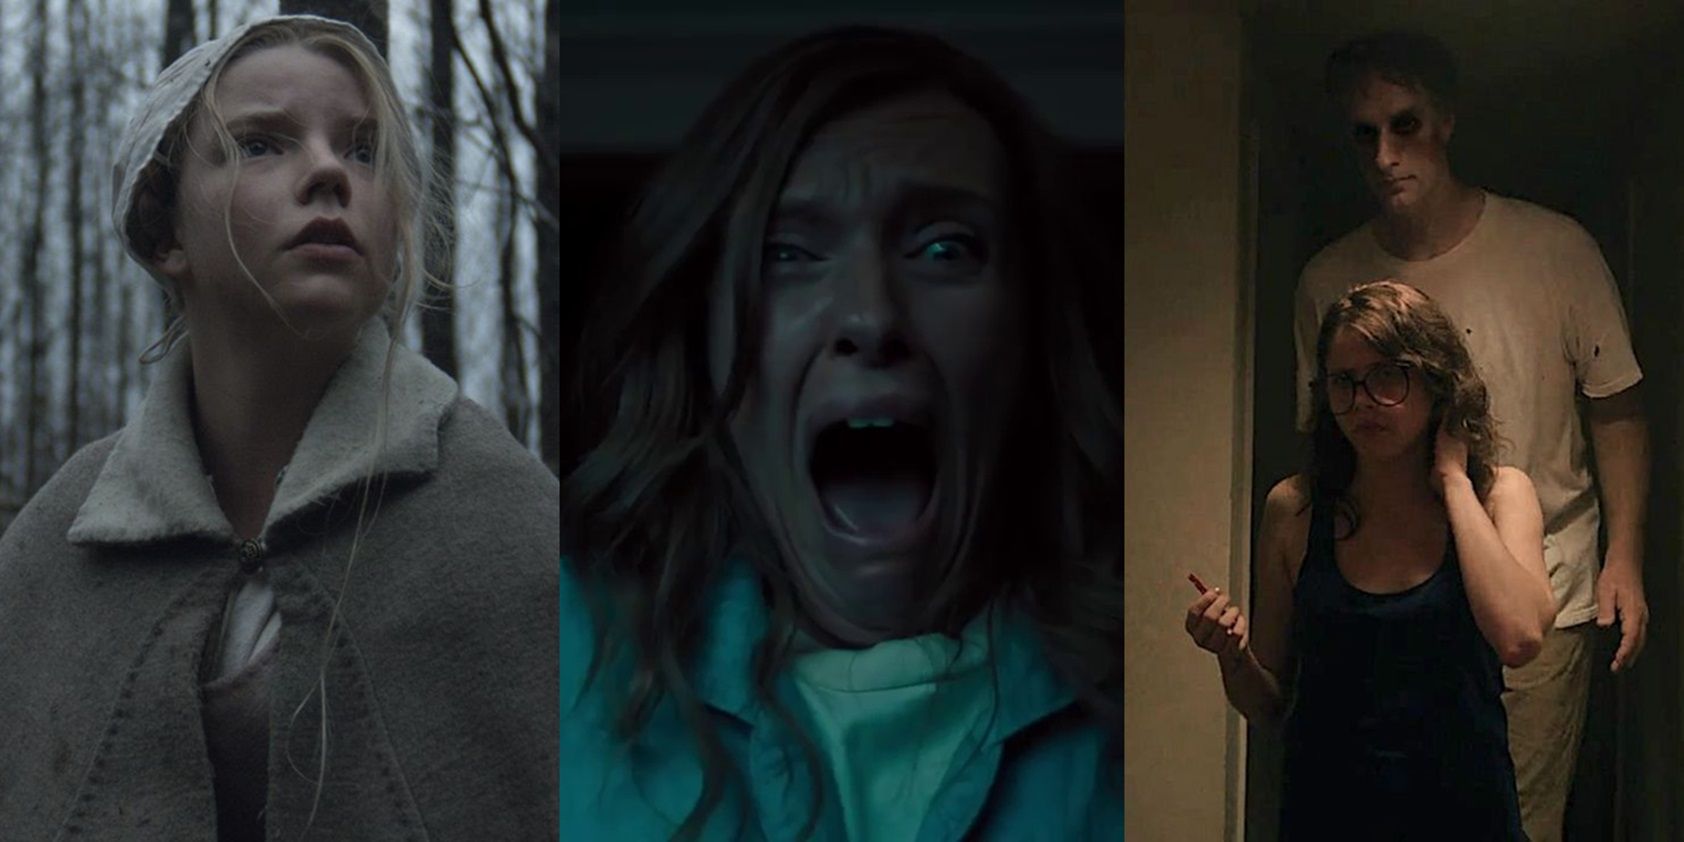 Best Horror Movies of the 21st Century: How to Watch Online